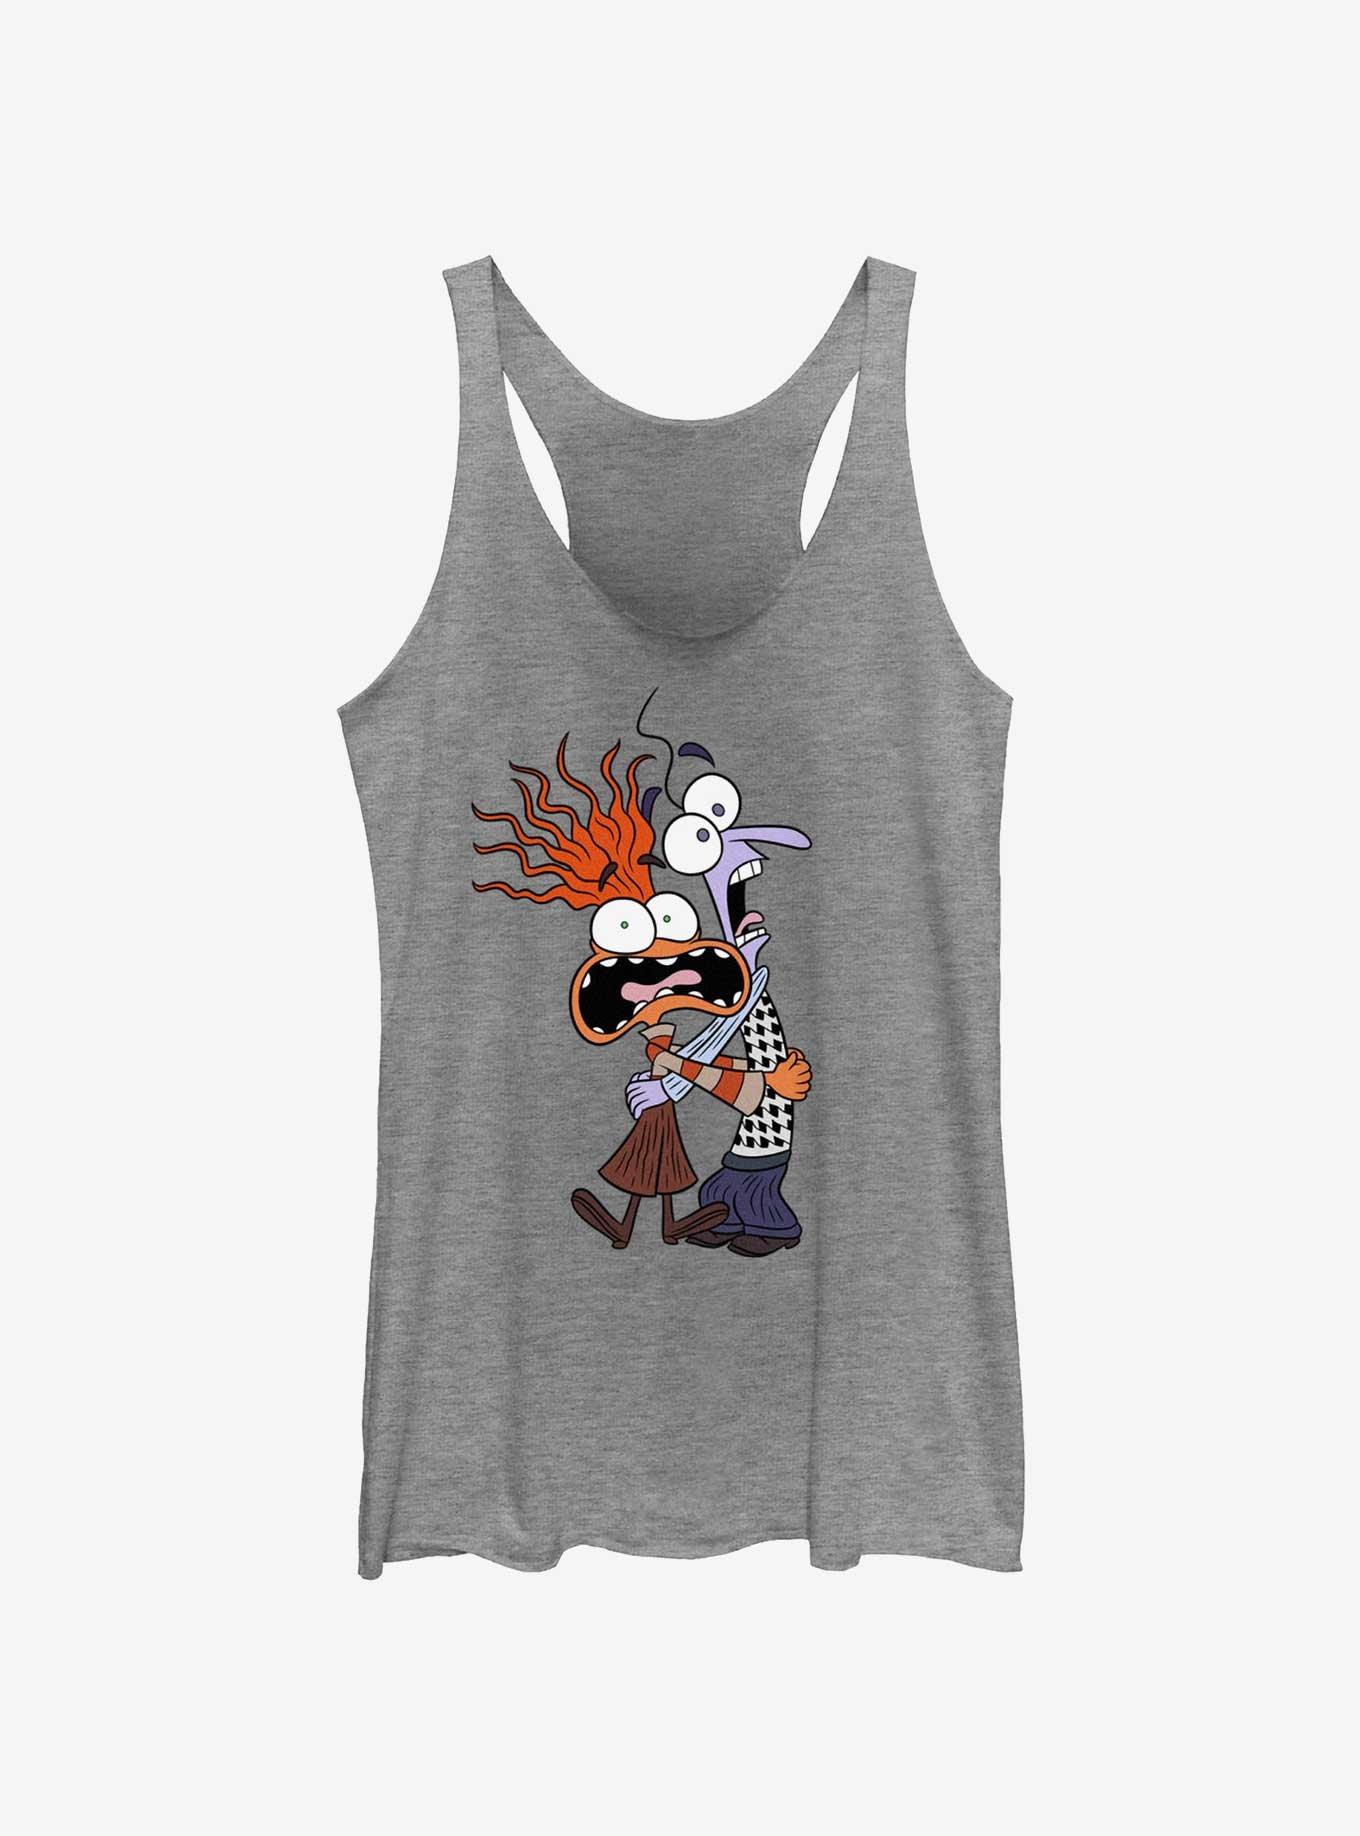 Disney Pixar Inside Out 2 Anxiety And Fear Girls Tank, GRAY HTR, hi-res